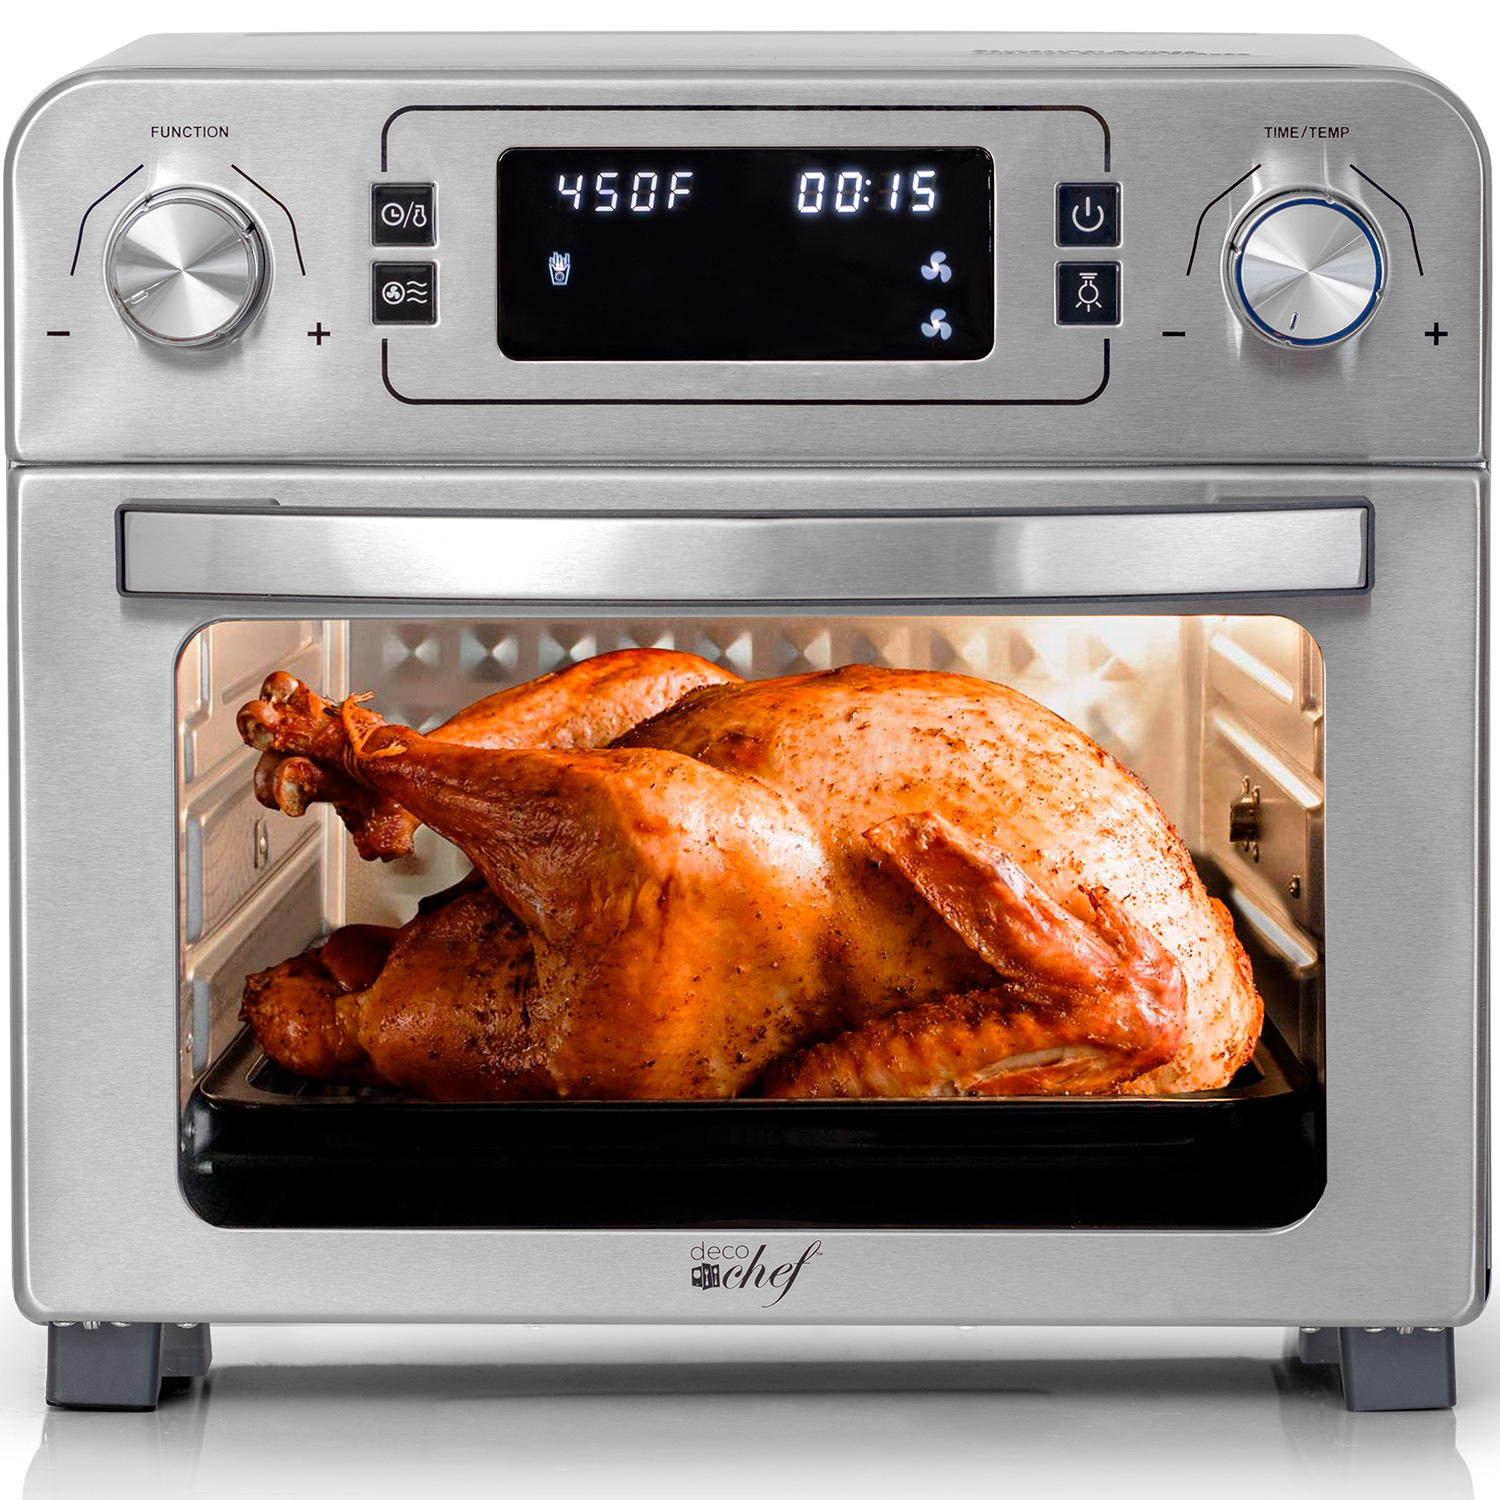 Deco Chef 24 QT Stainless Steel Countertop 1700 Watt Toaster Oven with Built-in Air Fryer and Included Rotisserie Assembly, Grill Rack, Frying Basket, and Baking Pan - image 7 of 11